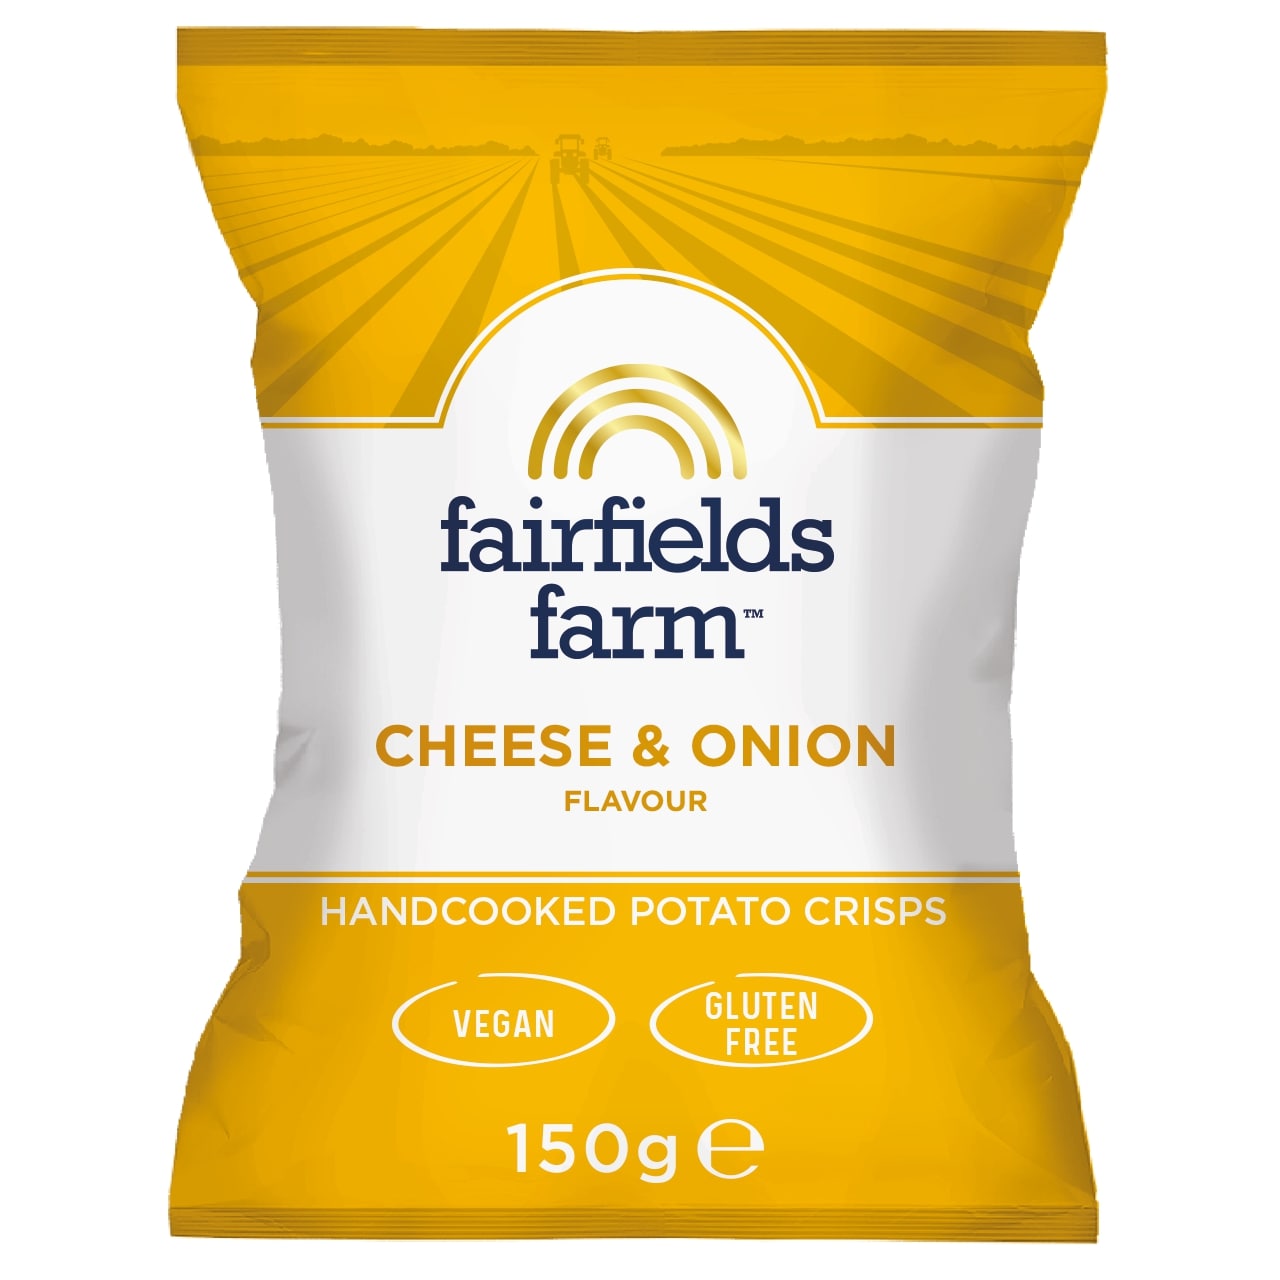 Cheese & Onion Flavour – 10 x 150g bags